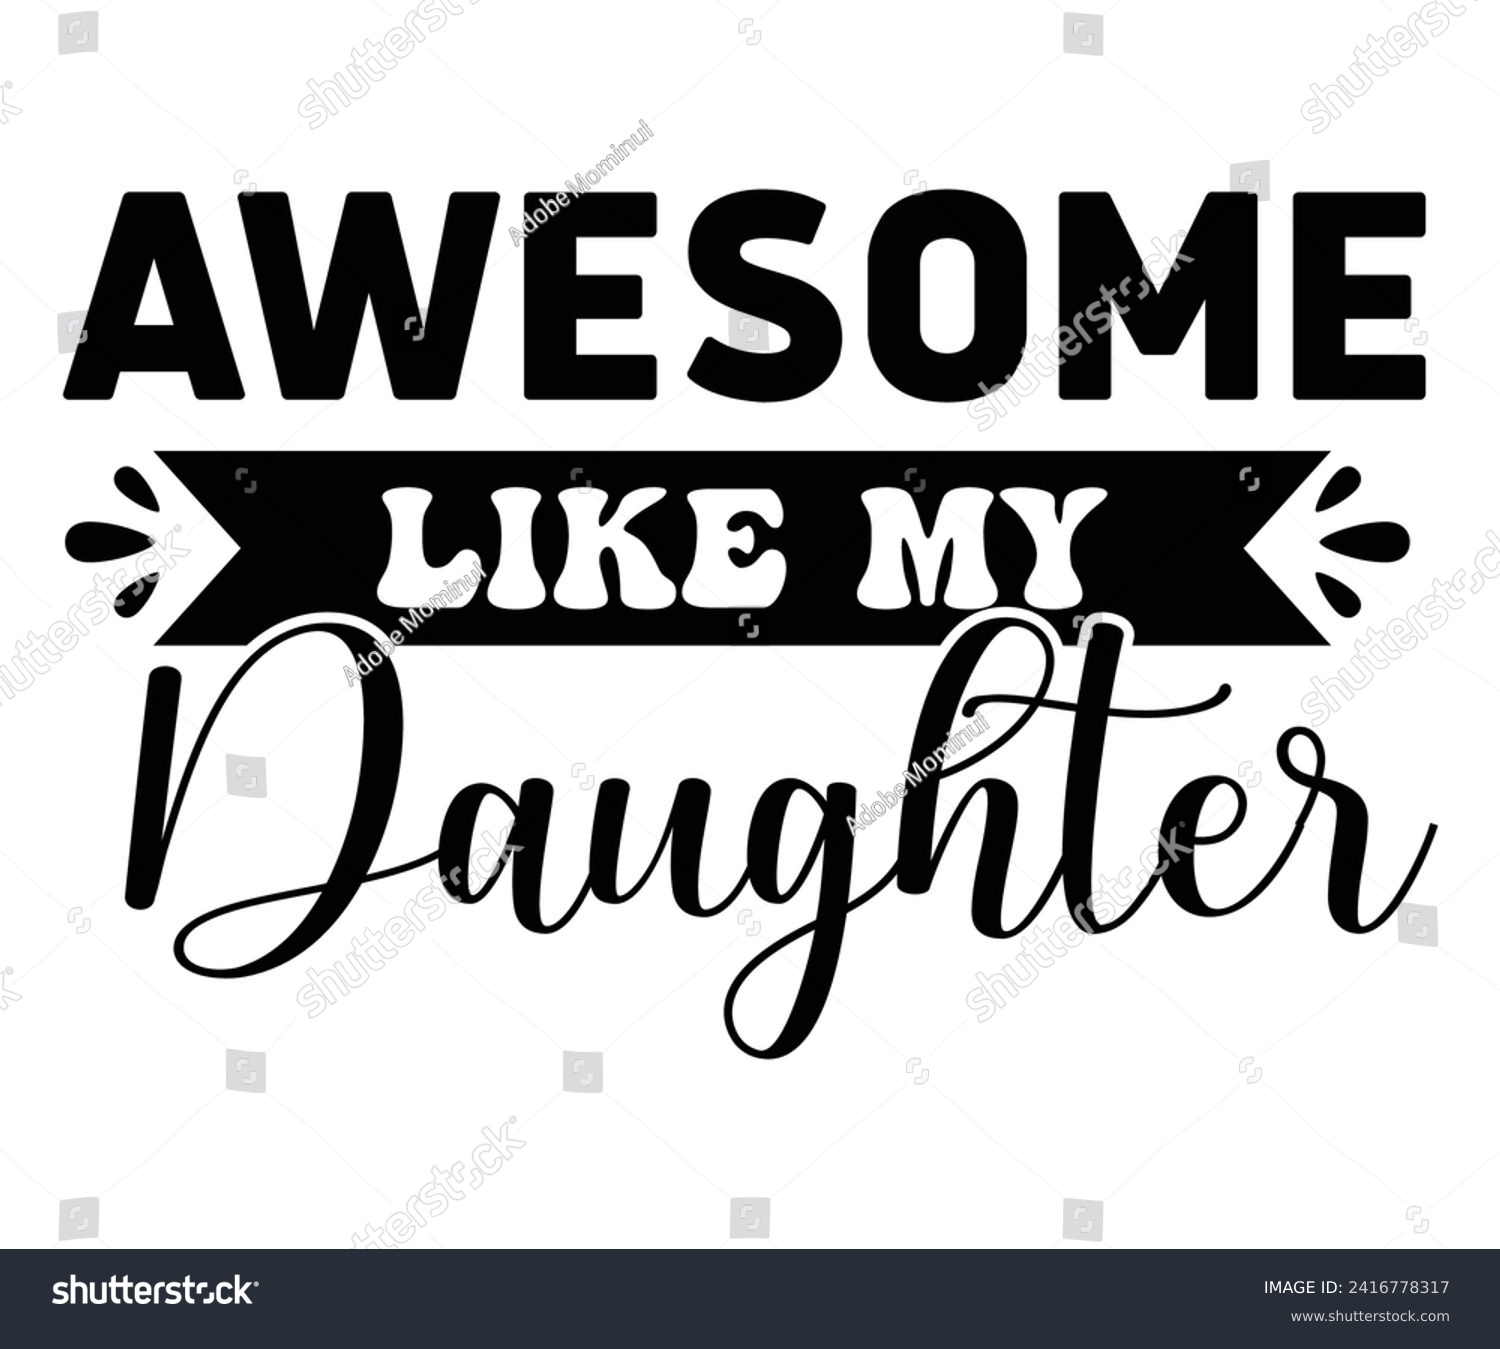 SVG of Awesome Like My Daughter Svg,Father's Day Svg,Papa svg,Grandpa Svg,Father's Day Saying Qoutes,Dad Svg,Funny Father, Gift For Dad Svg,Daddy Svg,Family Svg,T shirt Design,Svg Cut File,Typography svg